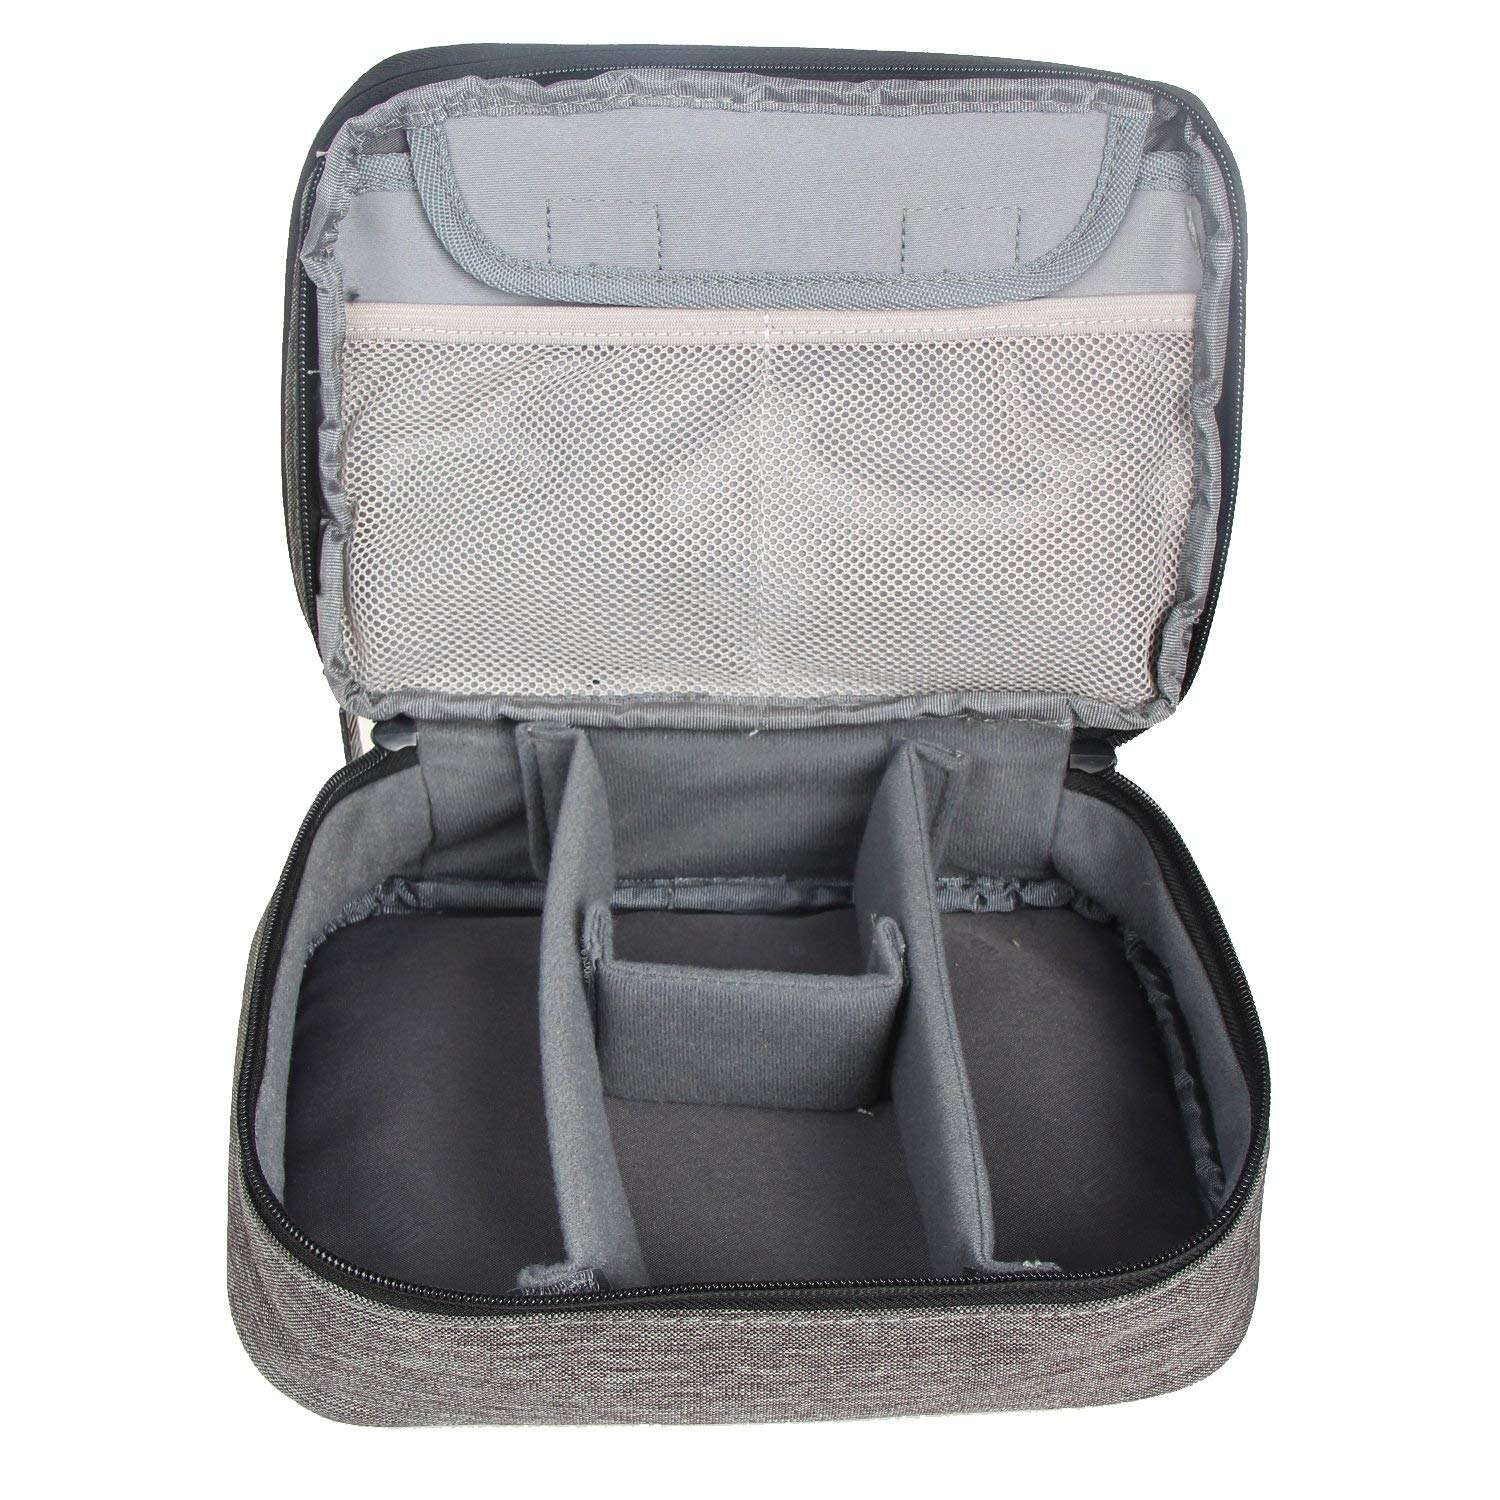 Cable Organizer Box Bag Product Details